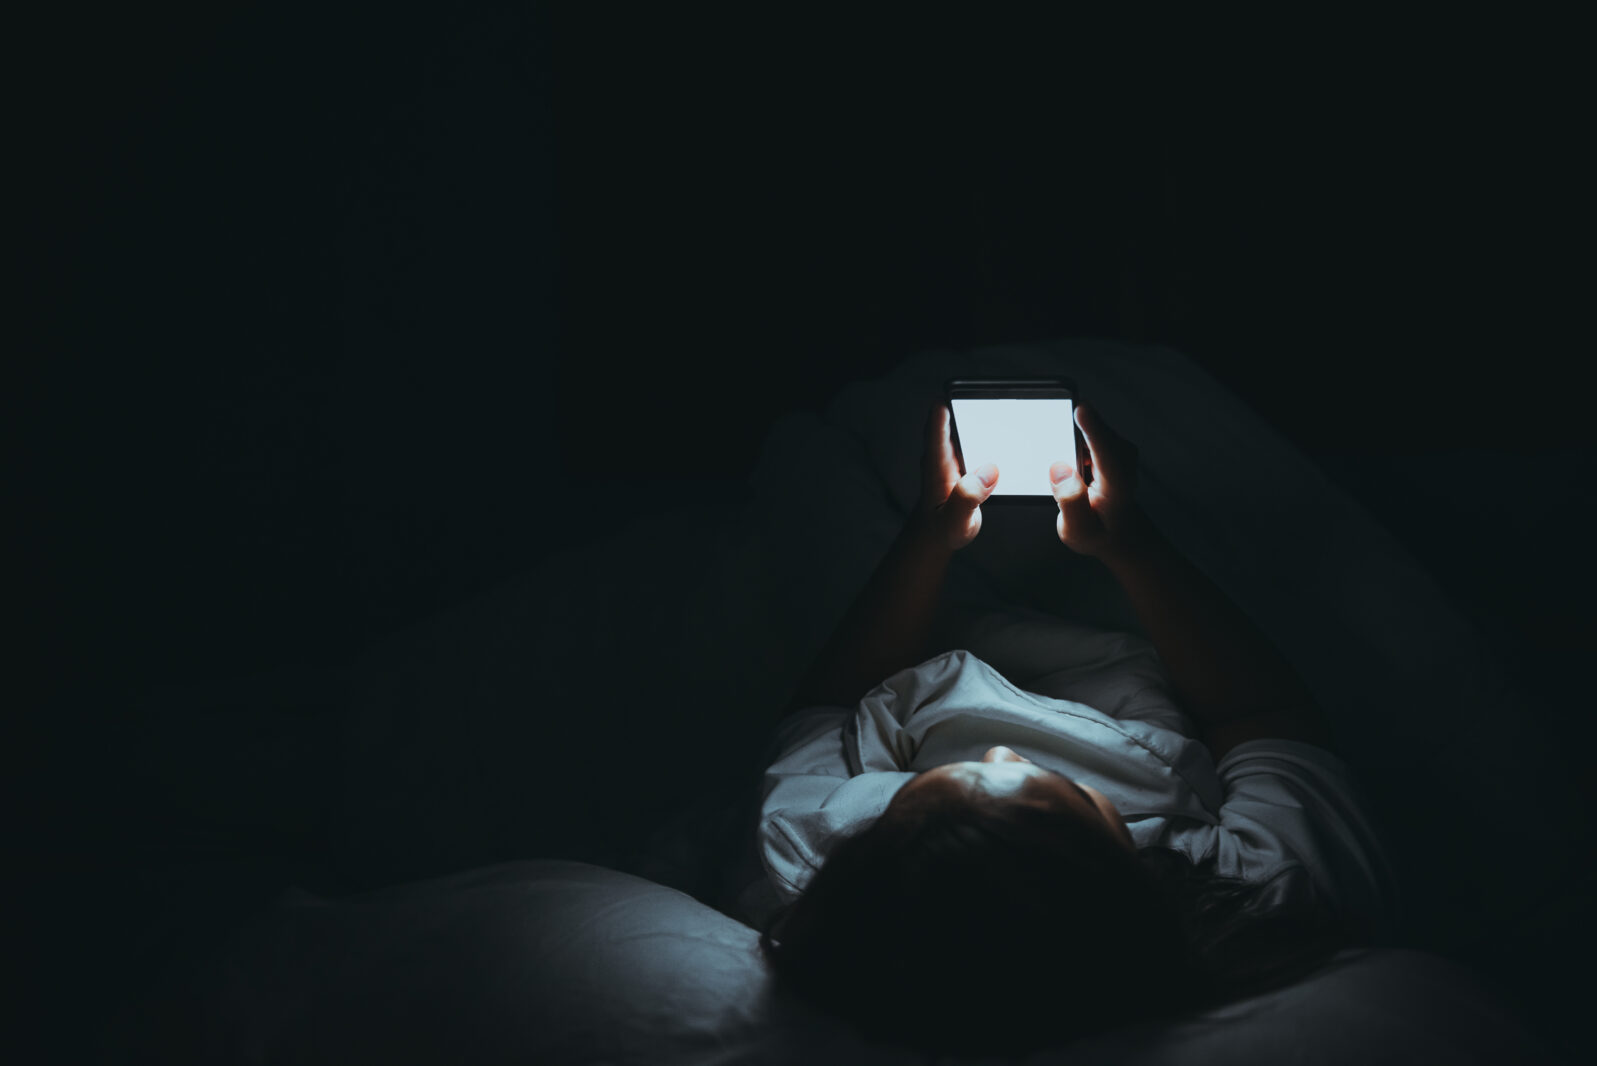 Asian woman playing game on smartphone in the bed at night,Thailand people,Addict social media